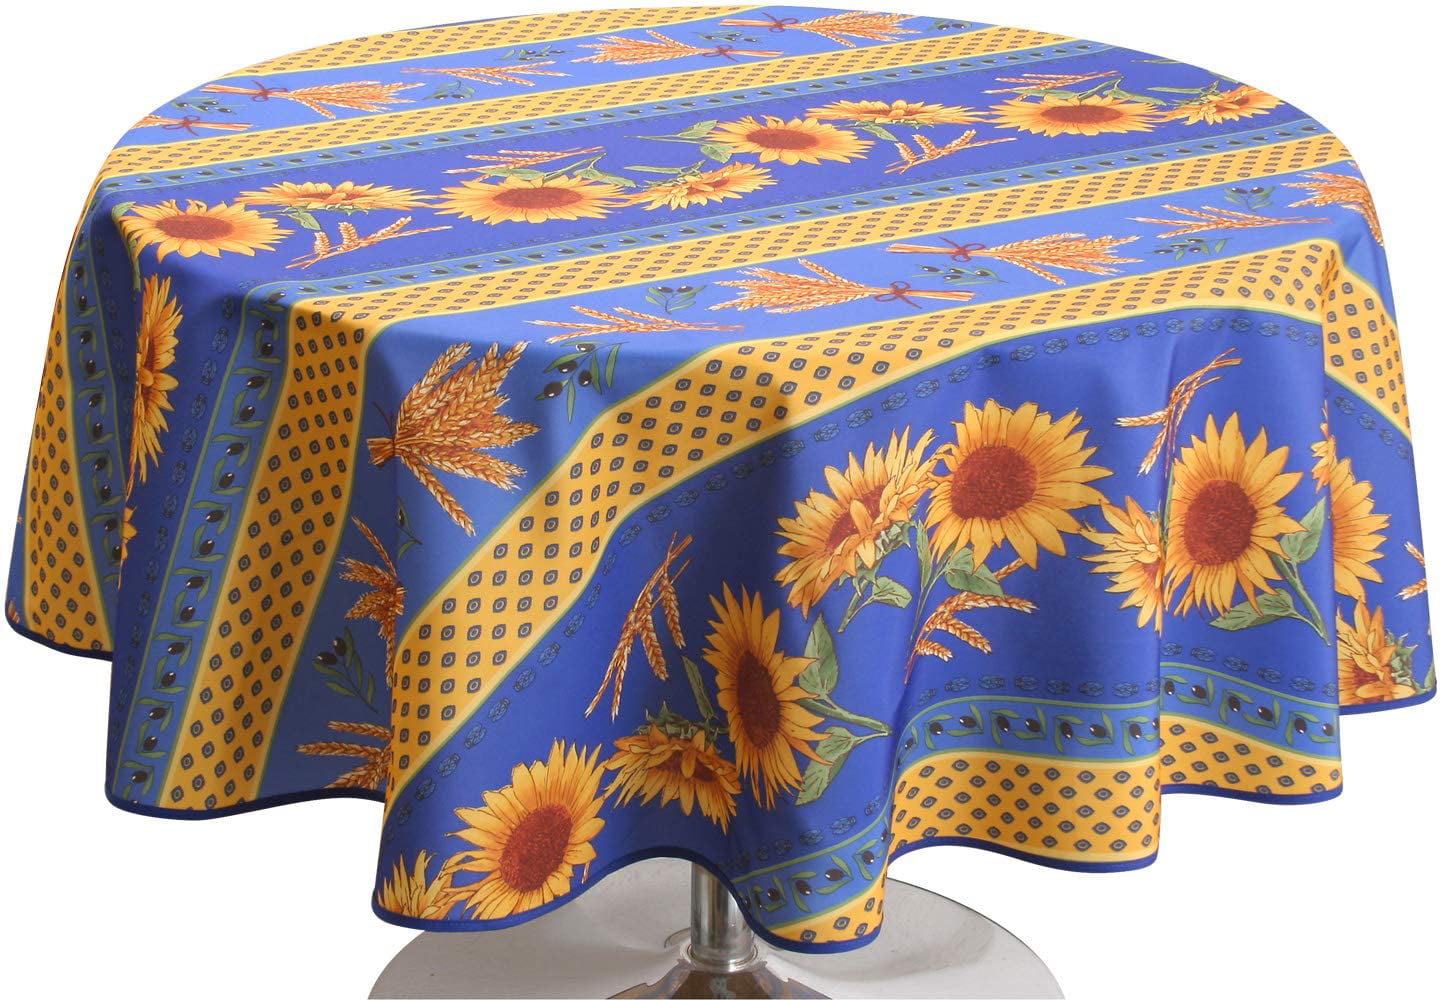 YELLOW COUNTRY FRENCH PROVENCE TABLECLOTH 60X80 RECTANGLE FLORAL LEMONS BLUE 